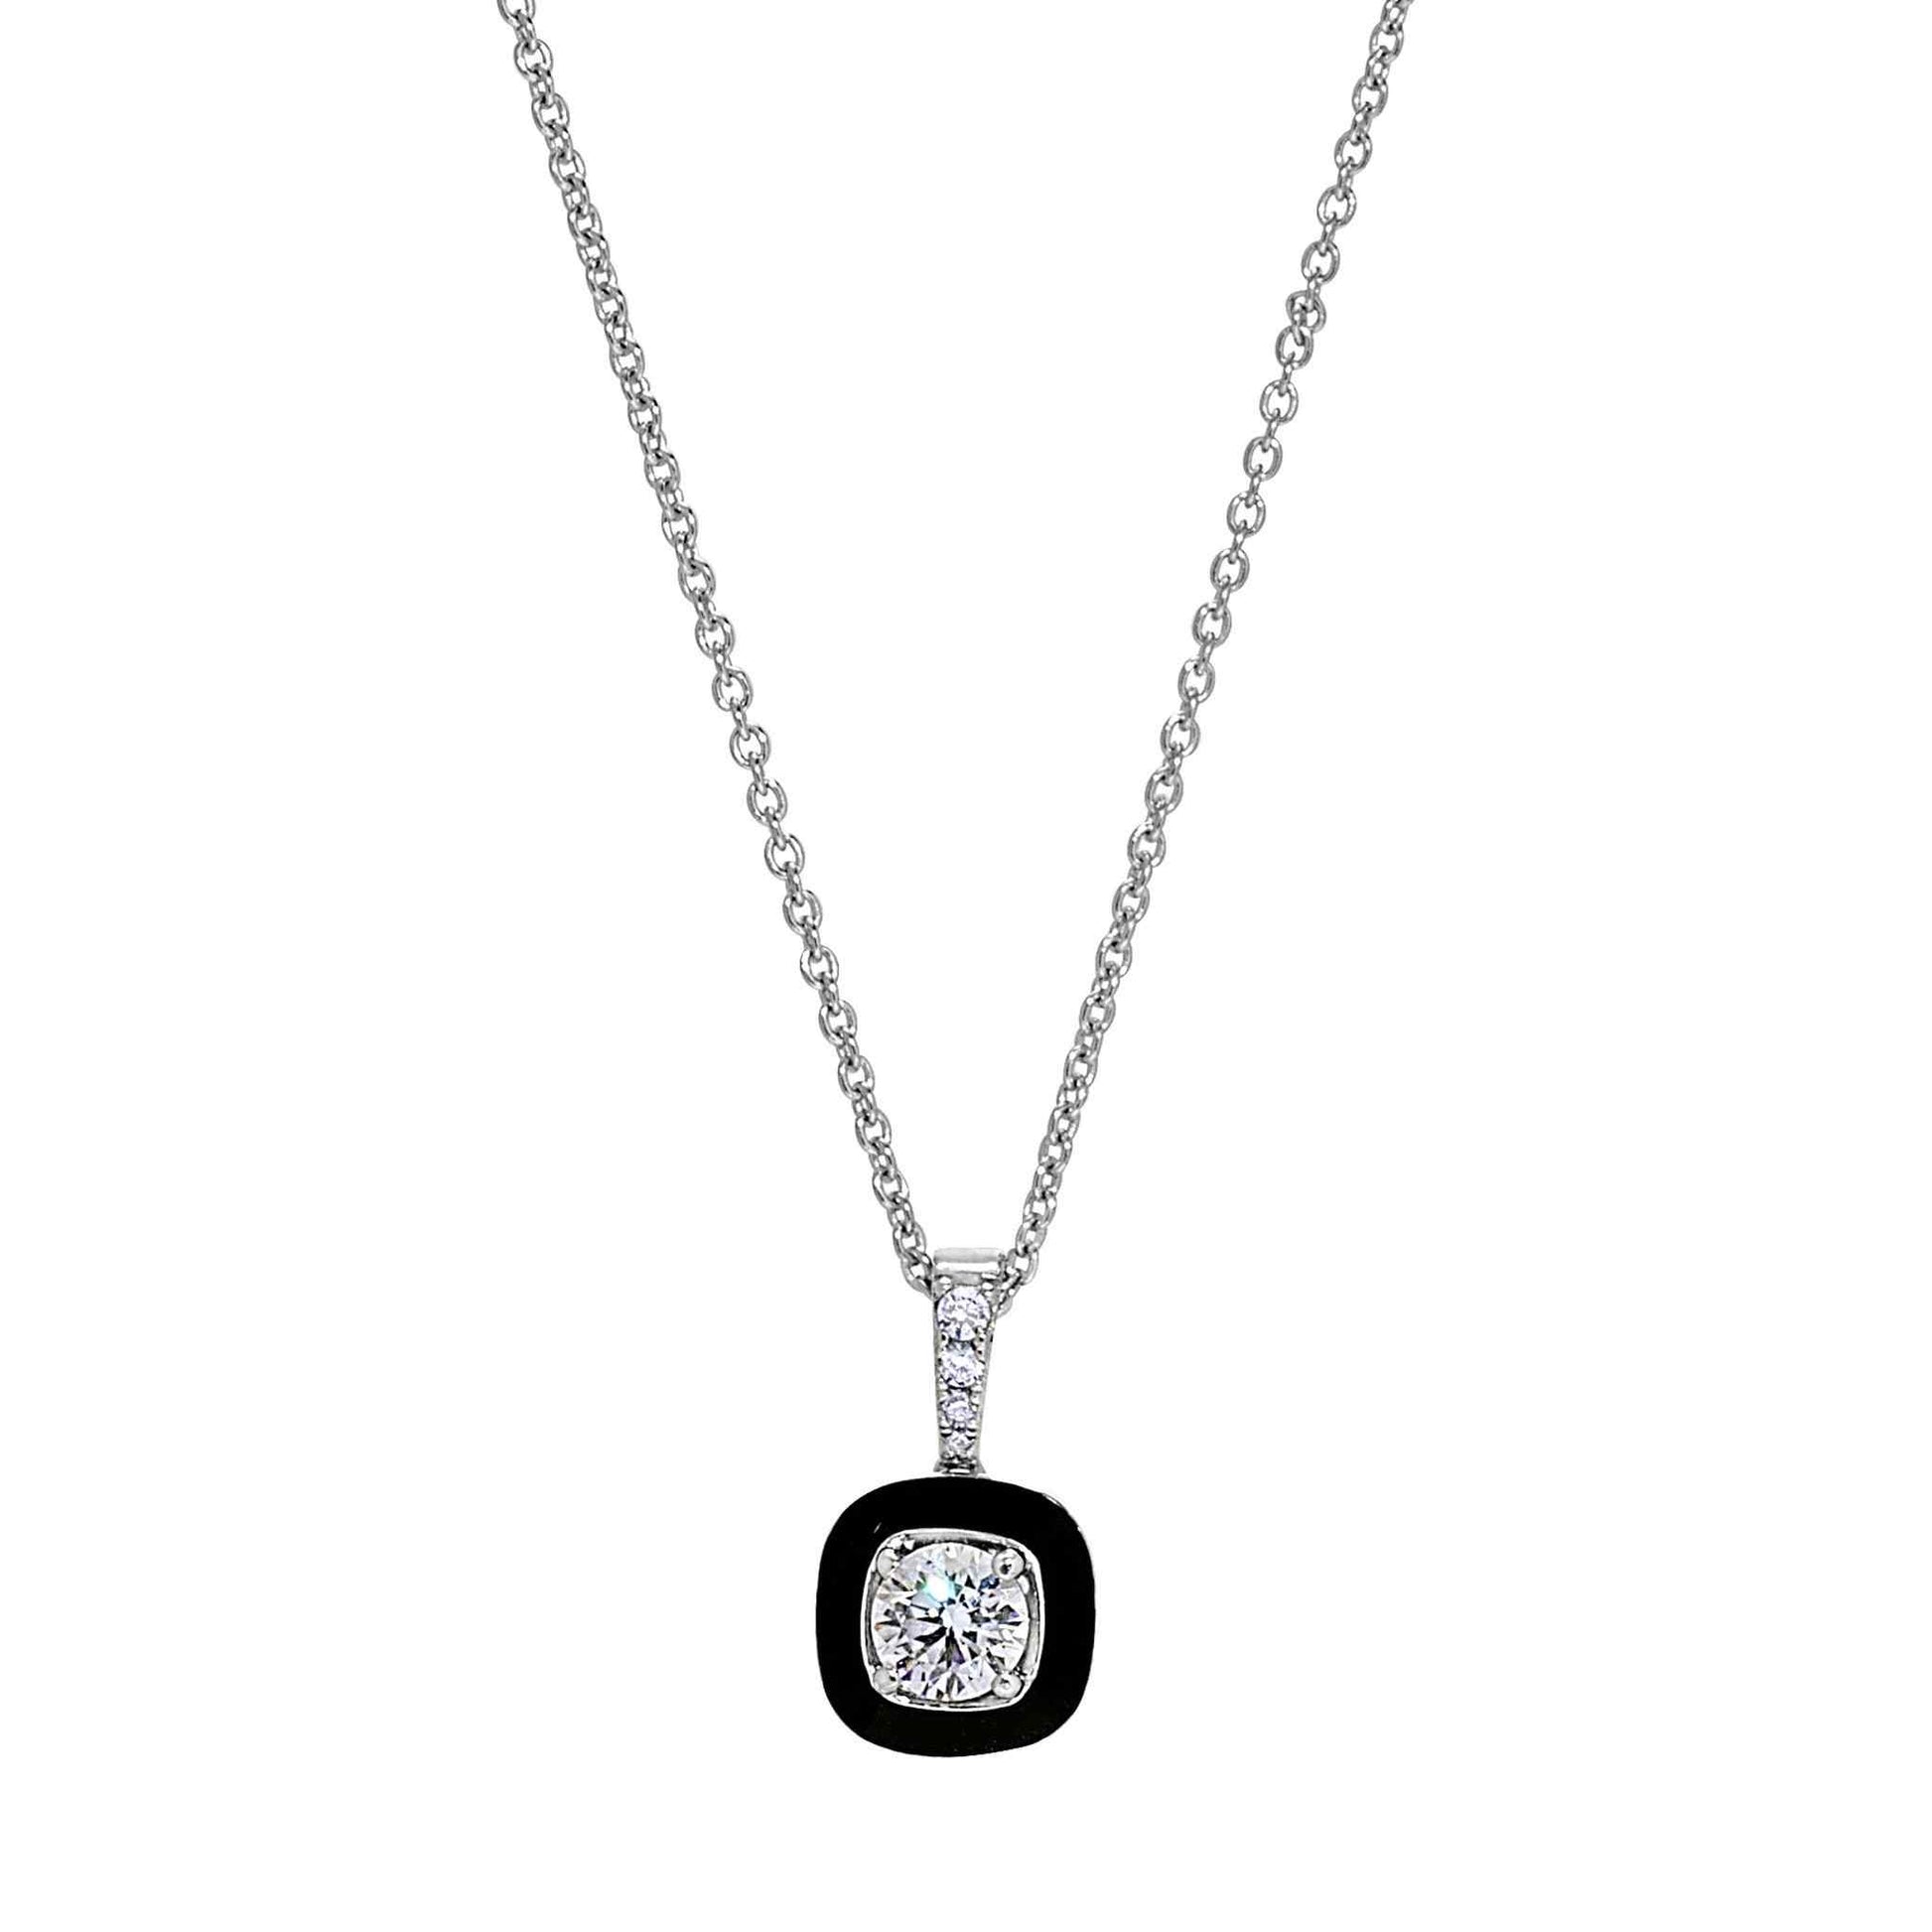 A small cushion cut necklace with black enamel and simulated diamonds displayed on a neutral white background.